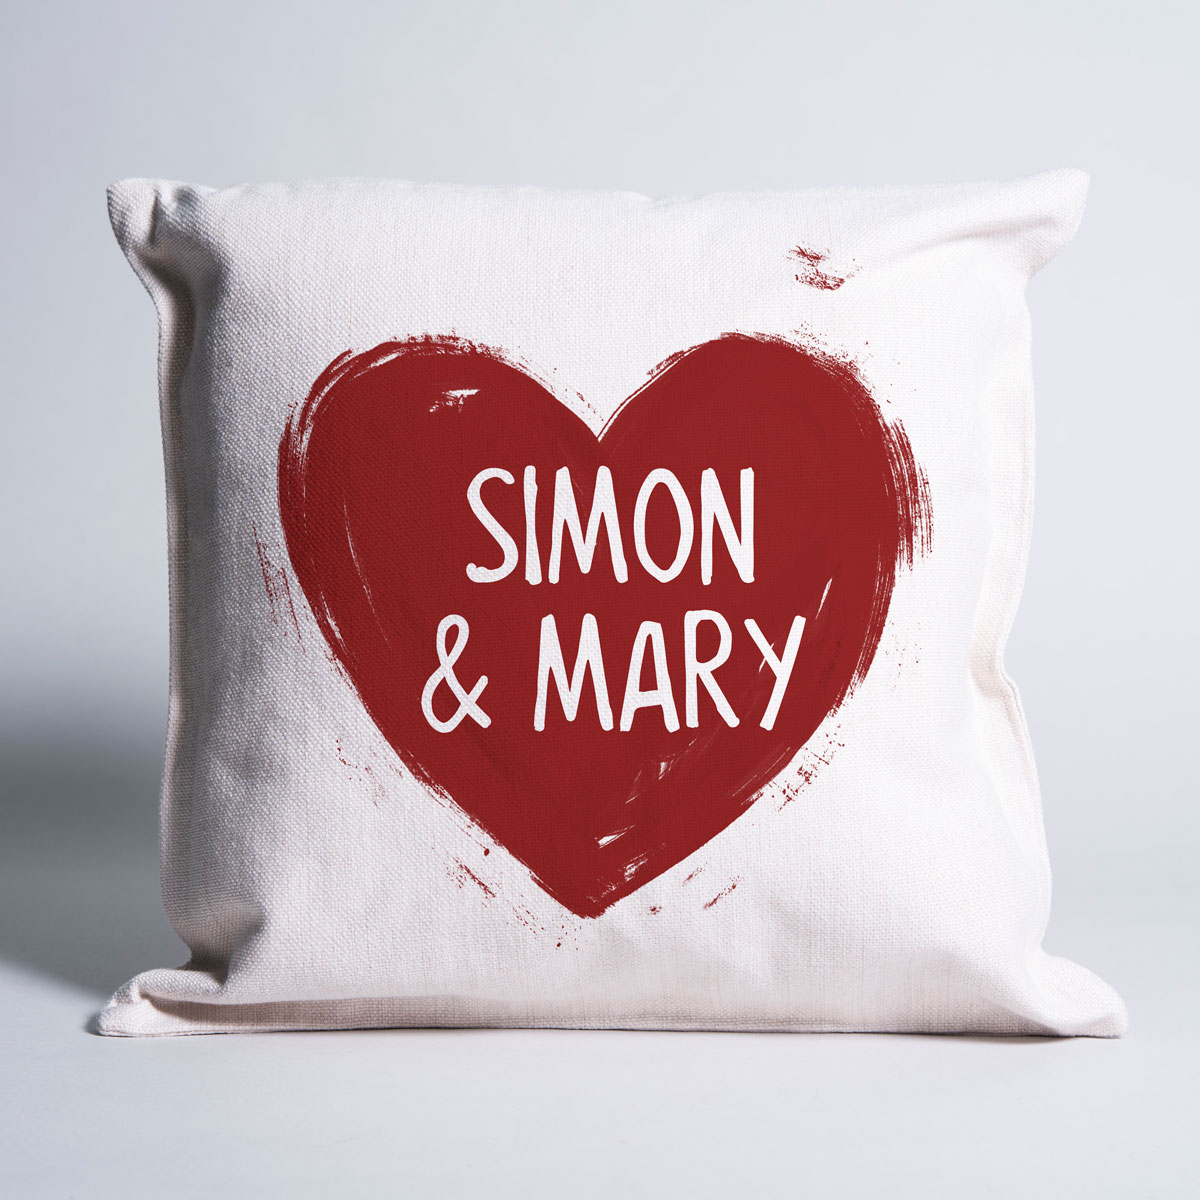 Personalised Cushion - Names In Heart